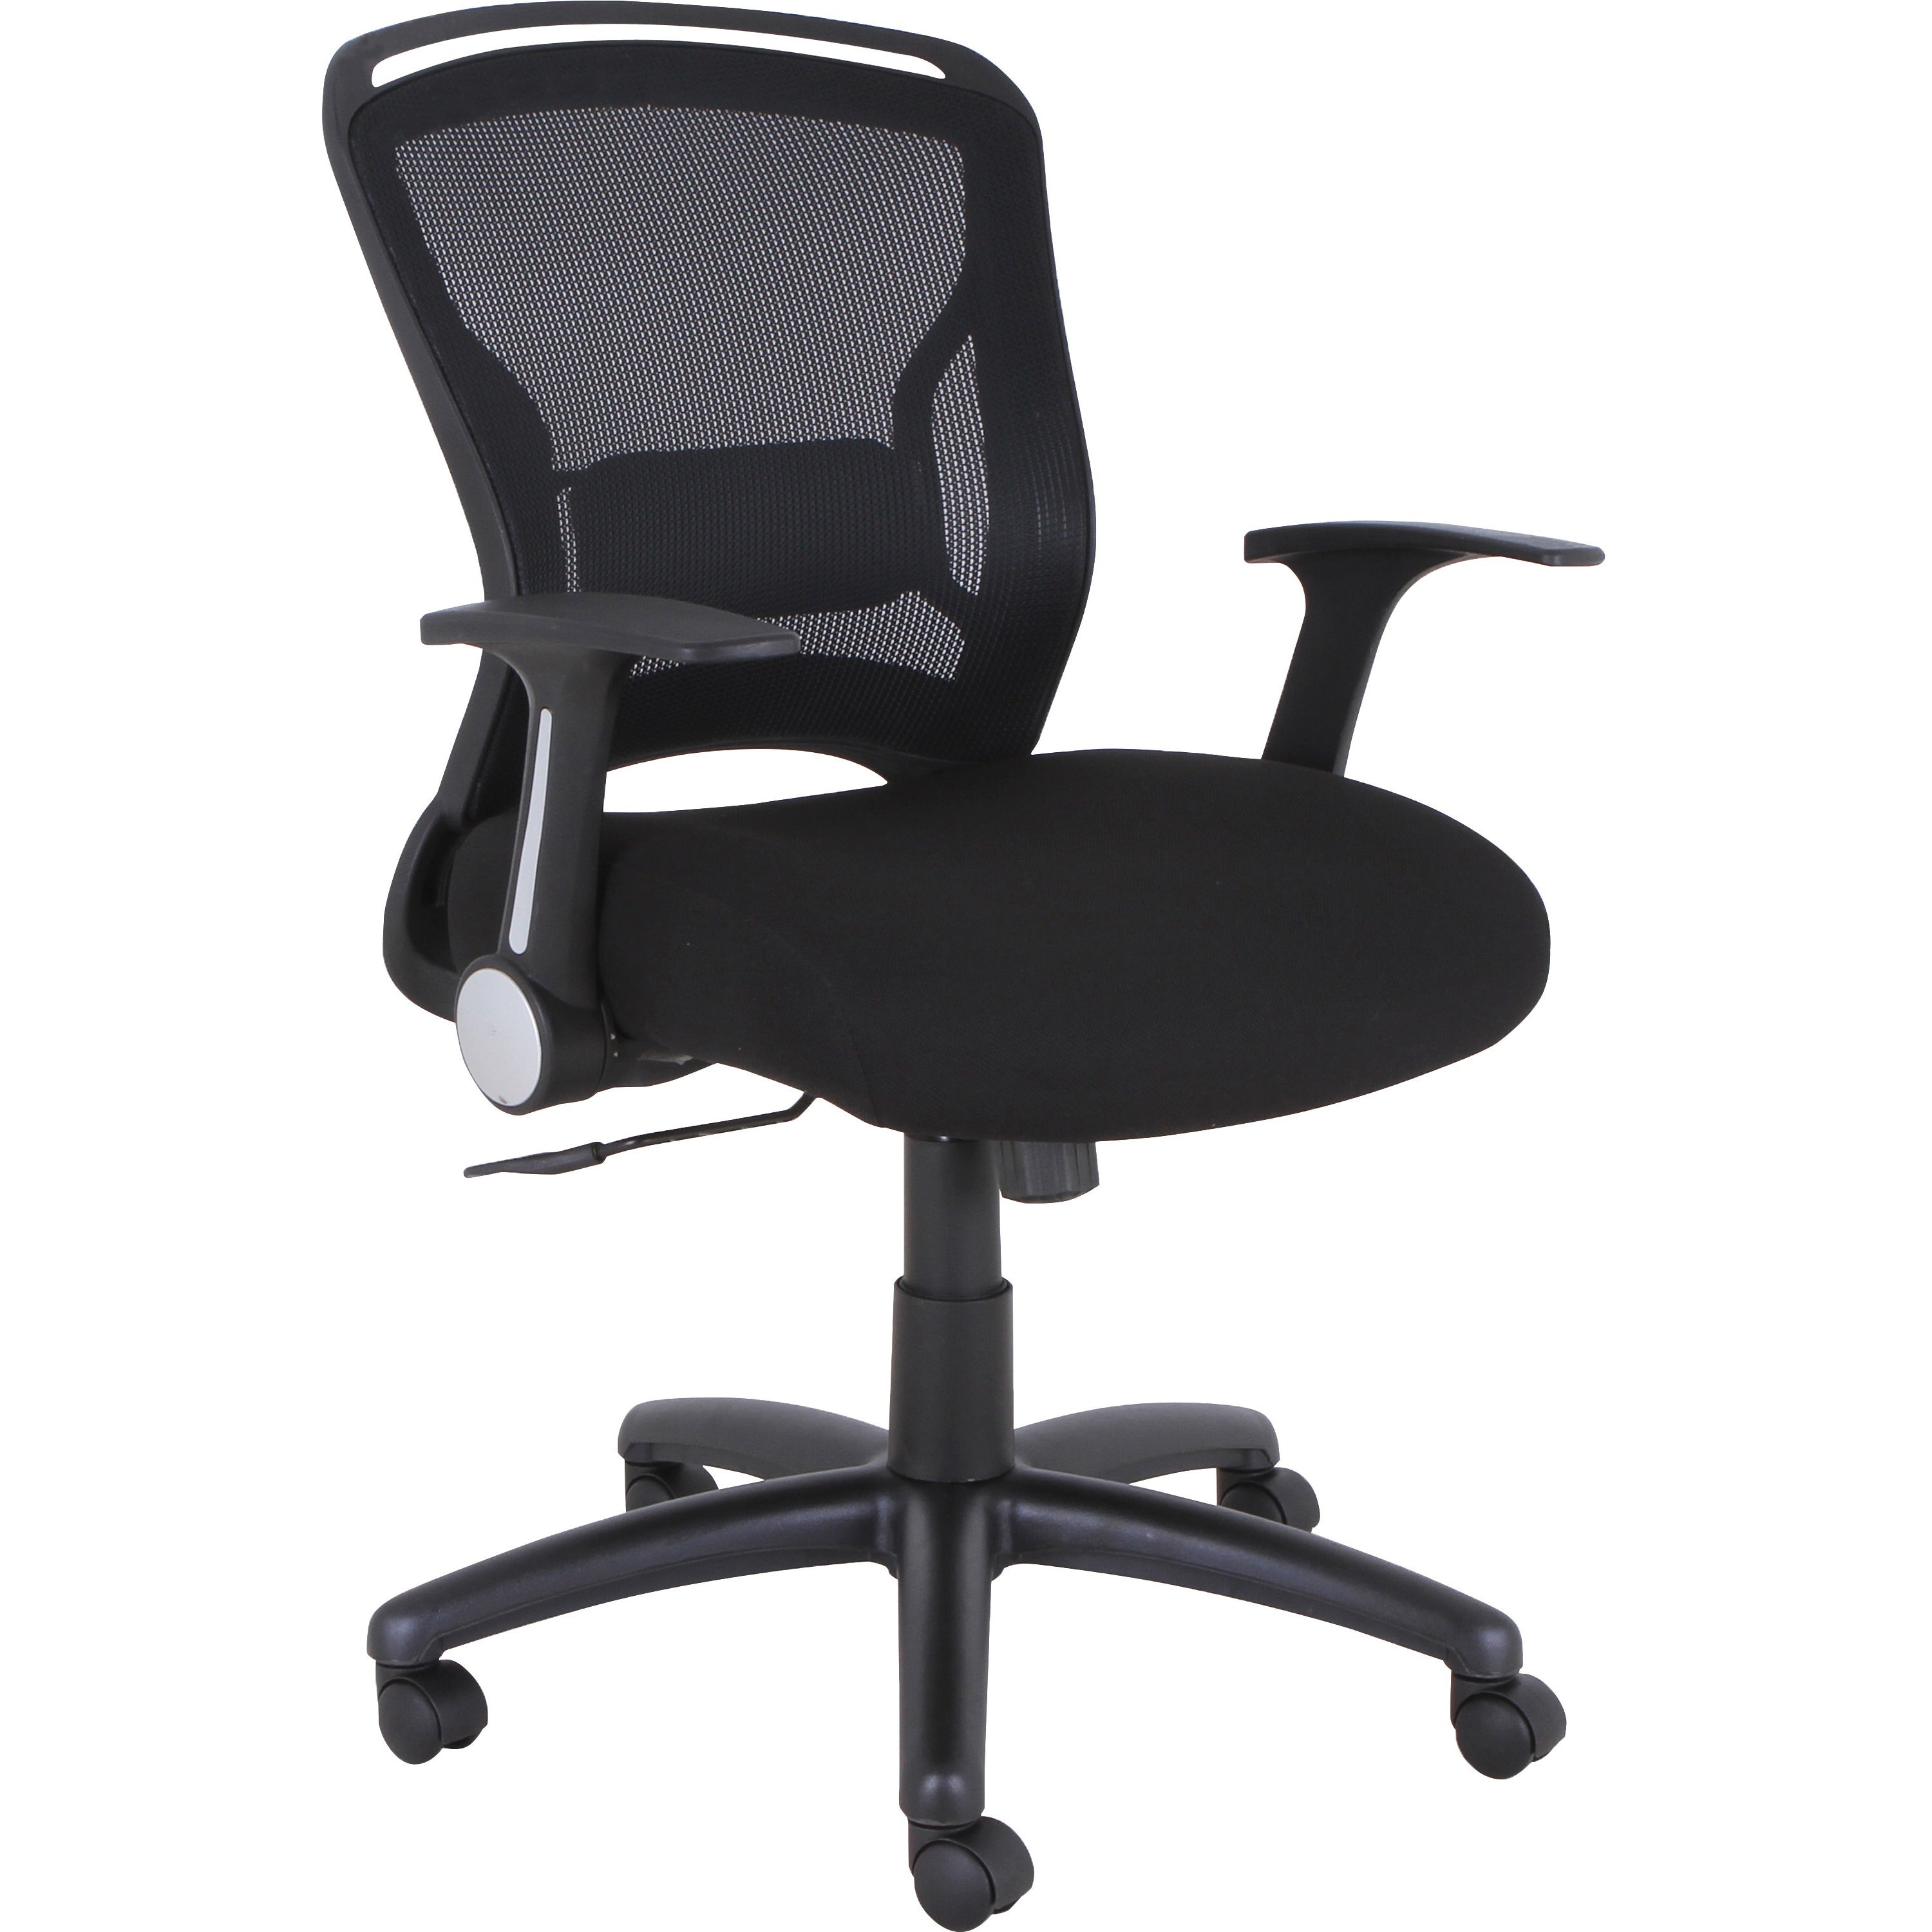 Lorell Flipper Arm Mid-back Office Chair - Fabric Seat - Mid Back - 5-star Base - Black - 1 Each - 